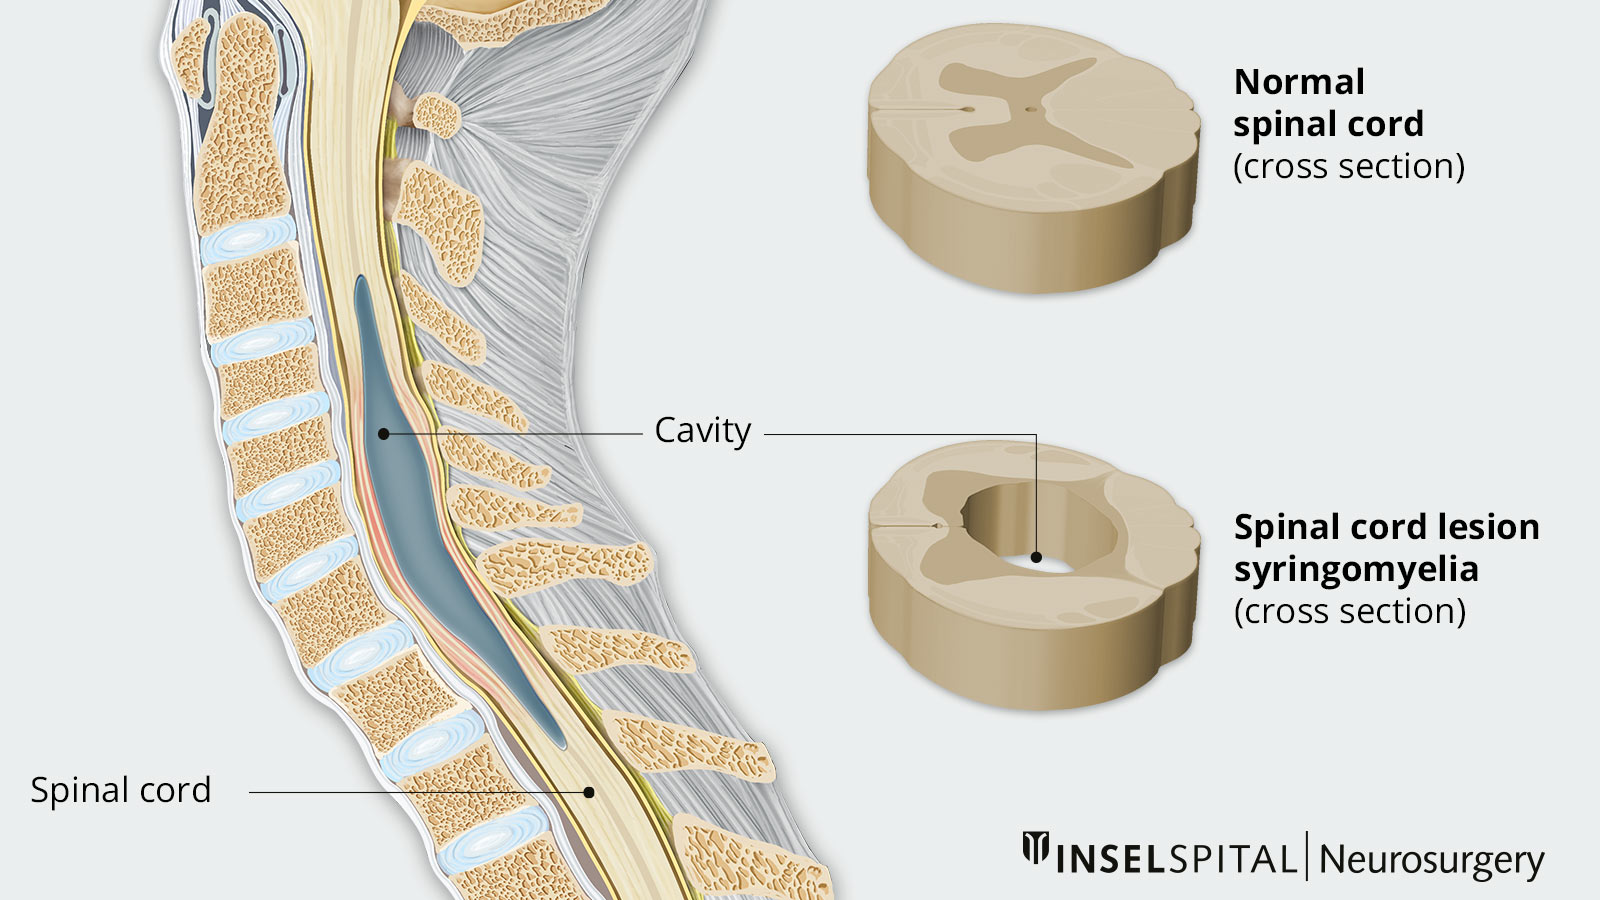 ​Drawing of spinal cord showing cavity displacing spinal cord. Detailed drawings of normal spinal cord and spinal cord with syringomyelia in cross section. 